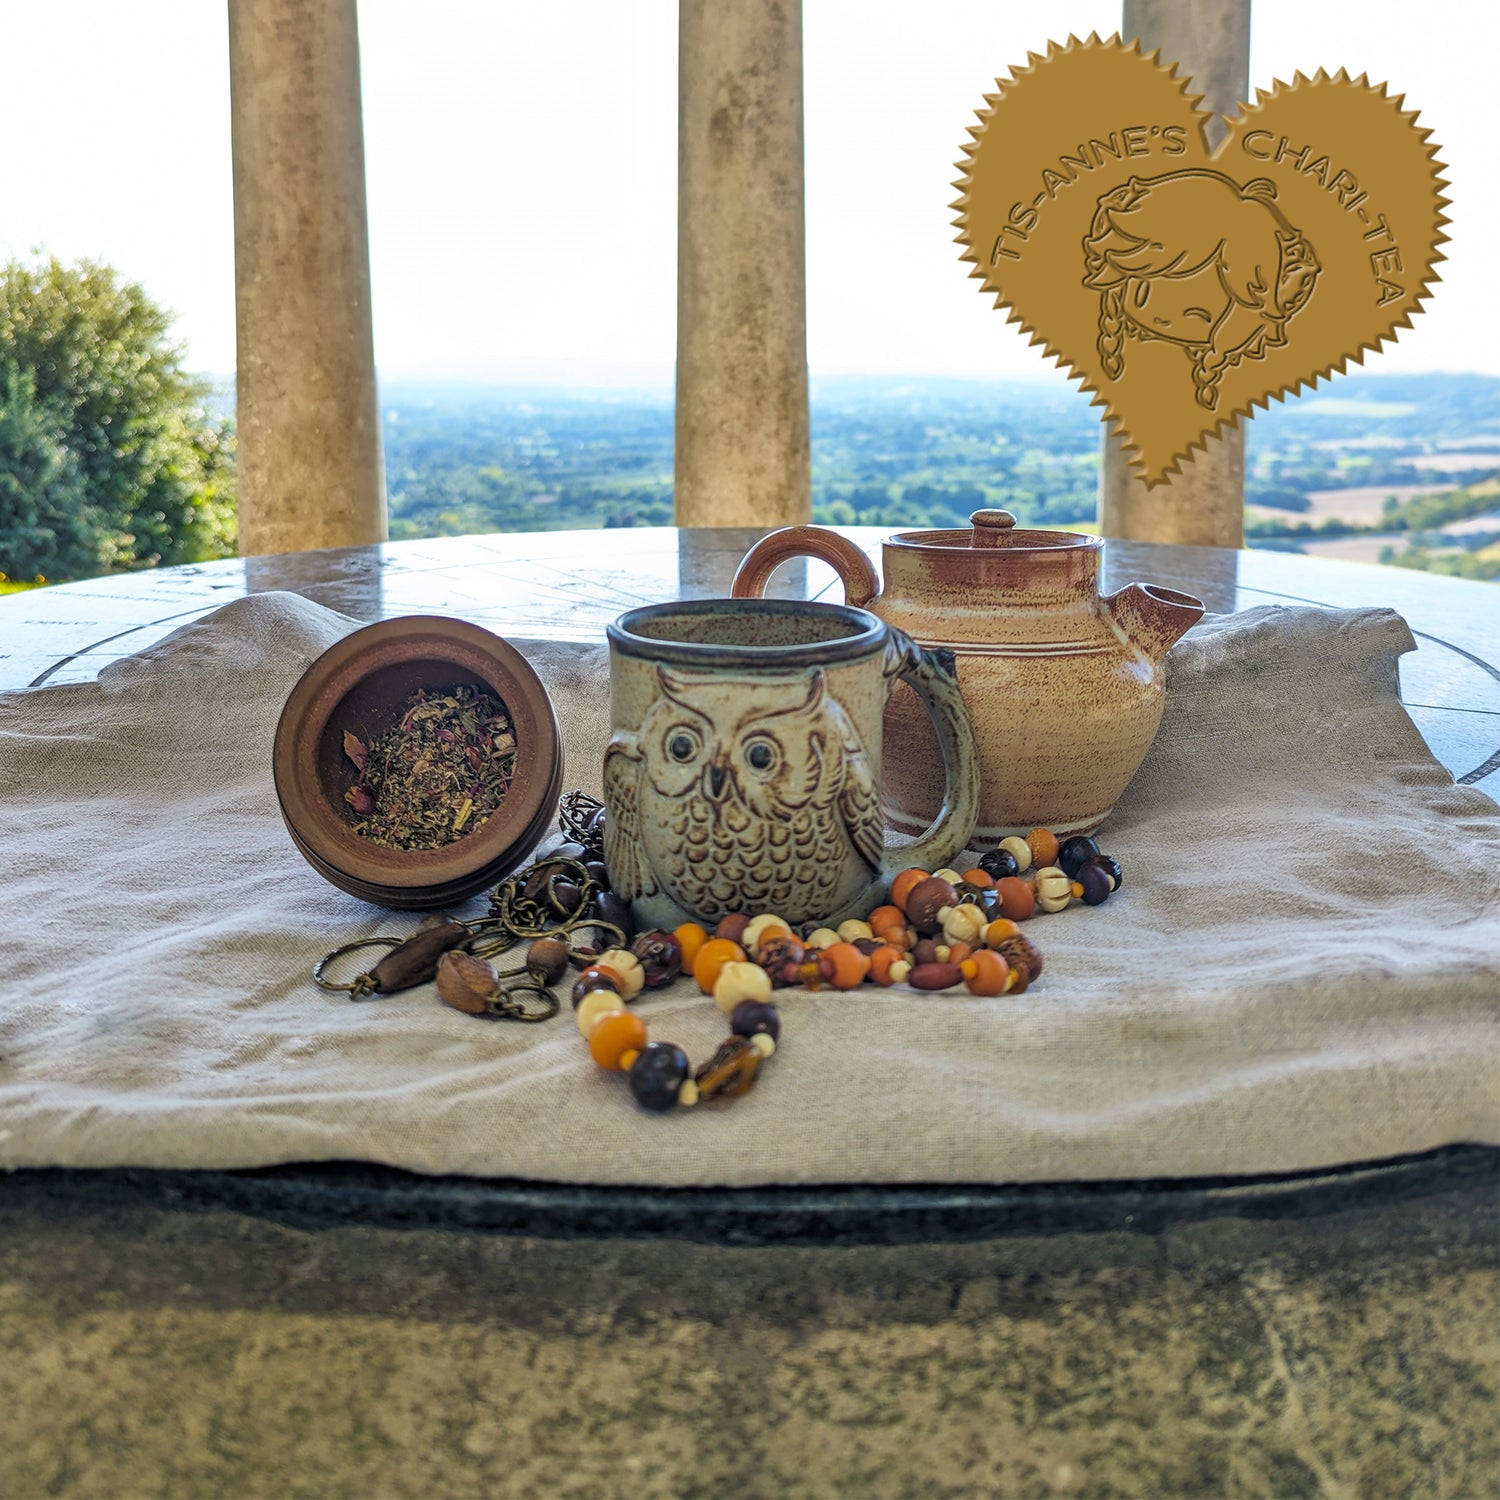 A clay teapot behind a rustic mug with an owl on it. Next to it is a wooden pot filled with a herbal blend. Stone pillars are in the background, with fields and trees in the distance. A heart-shaped badge in the top left corner reads "Tis-Anne's Chari-Tea".